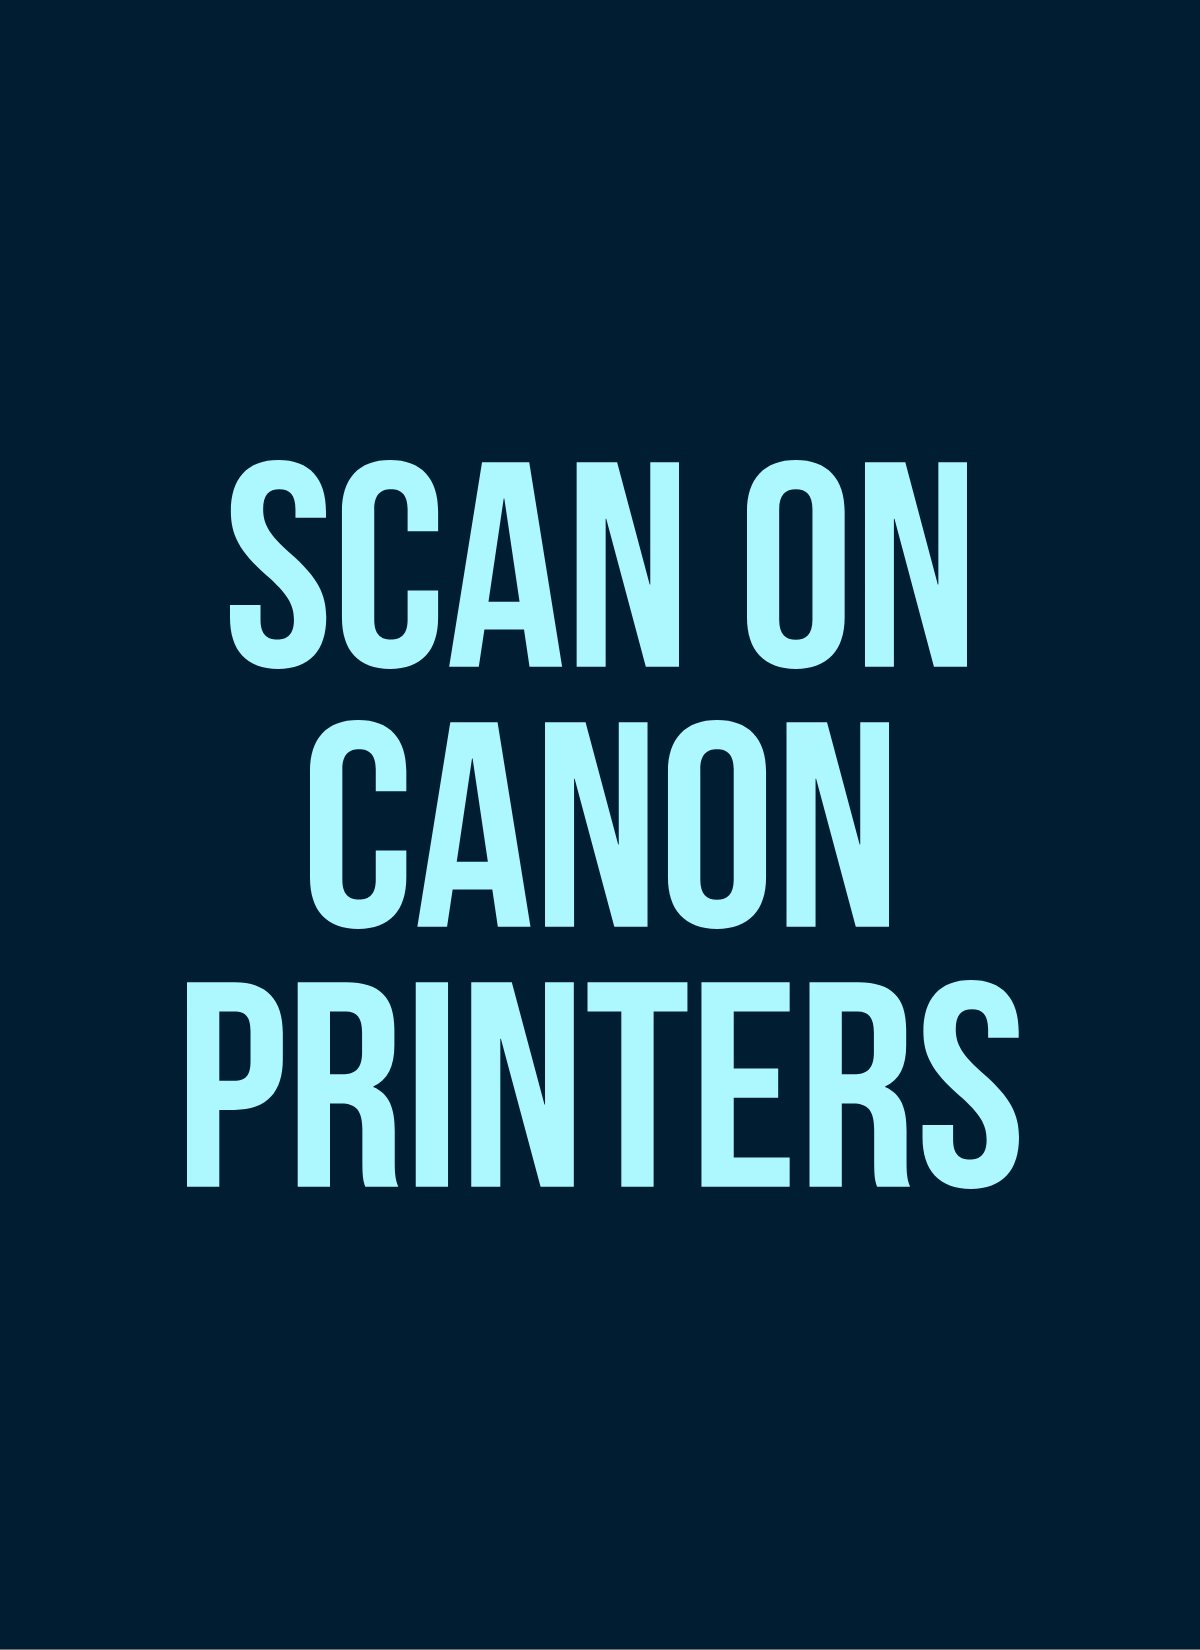 How to Scan on Canon Printers